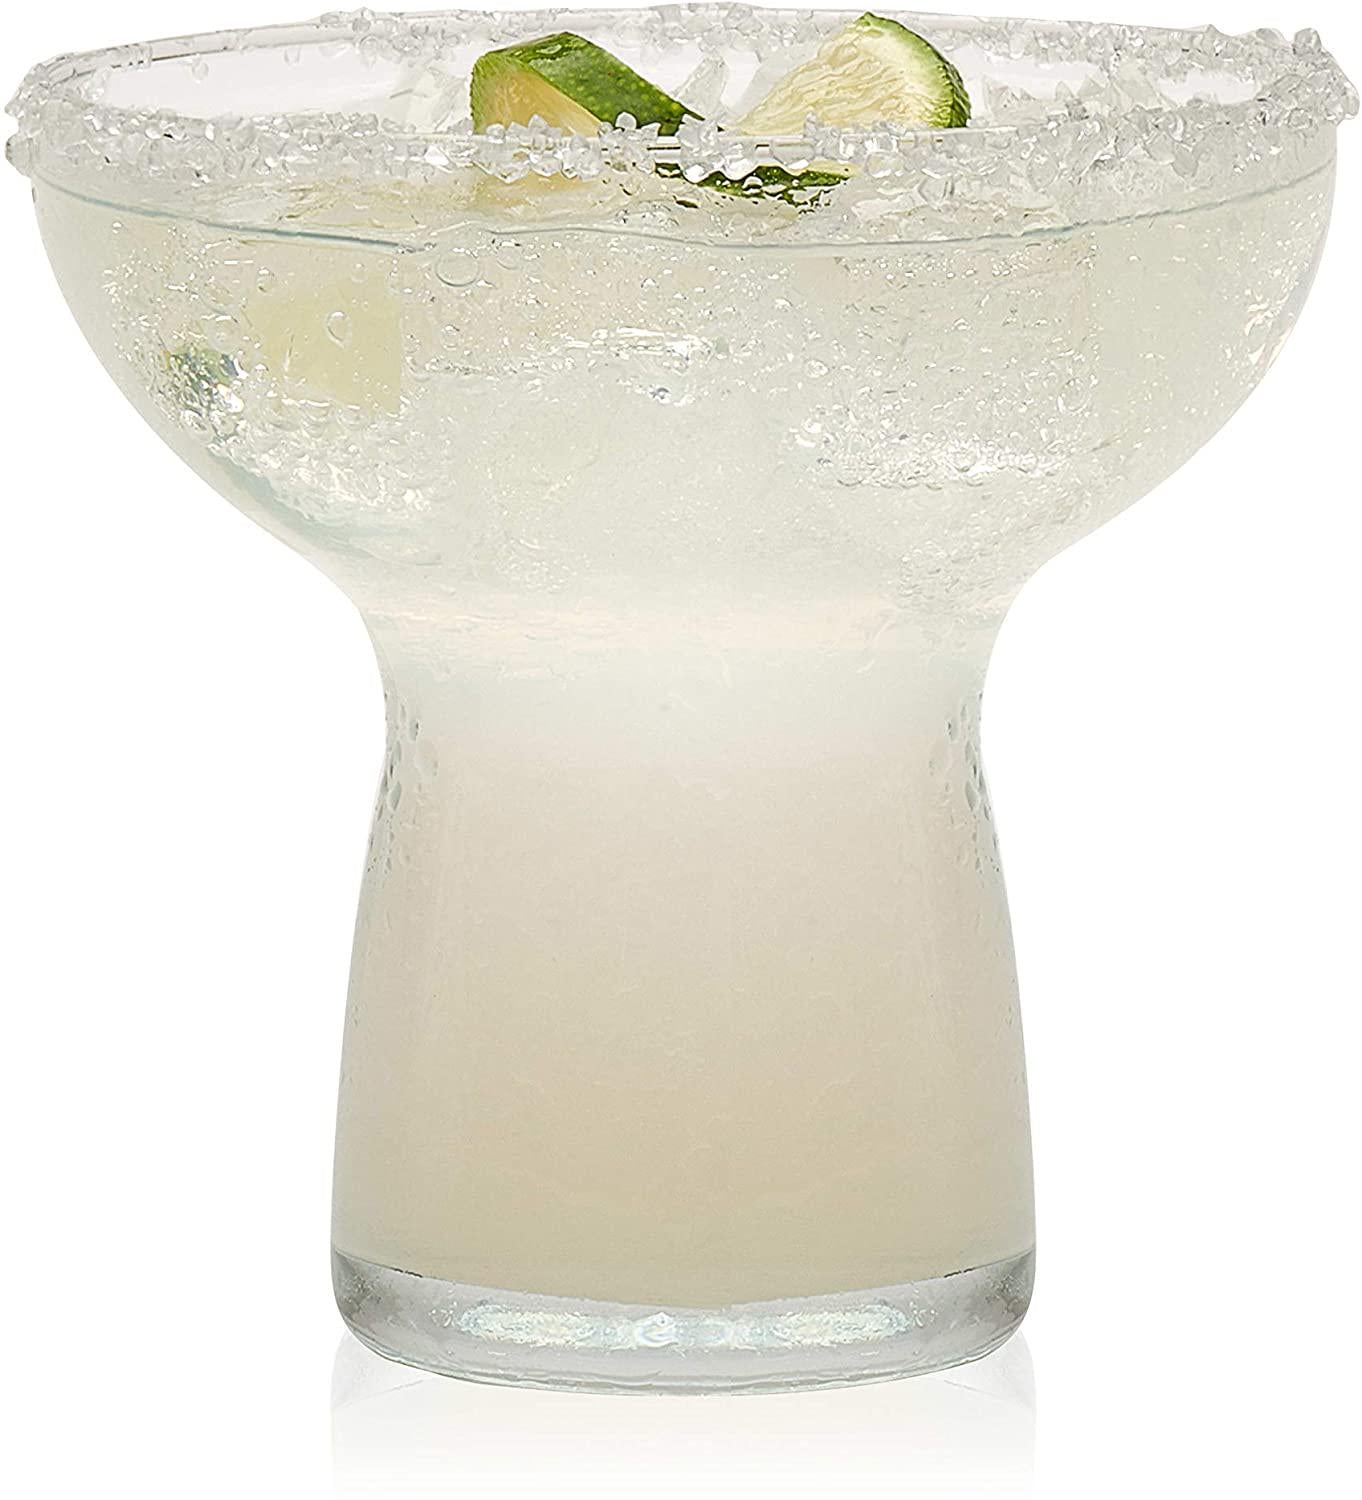 Libbey, Libbey Stemless Margarita Glasses, 10.25-Ounce, Set of 6